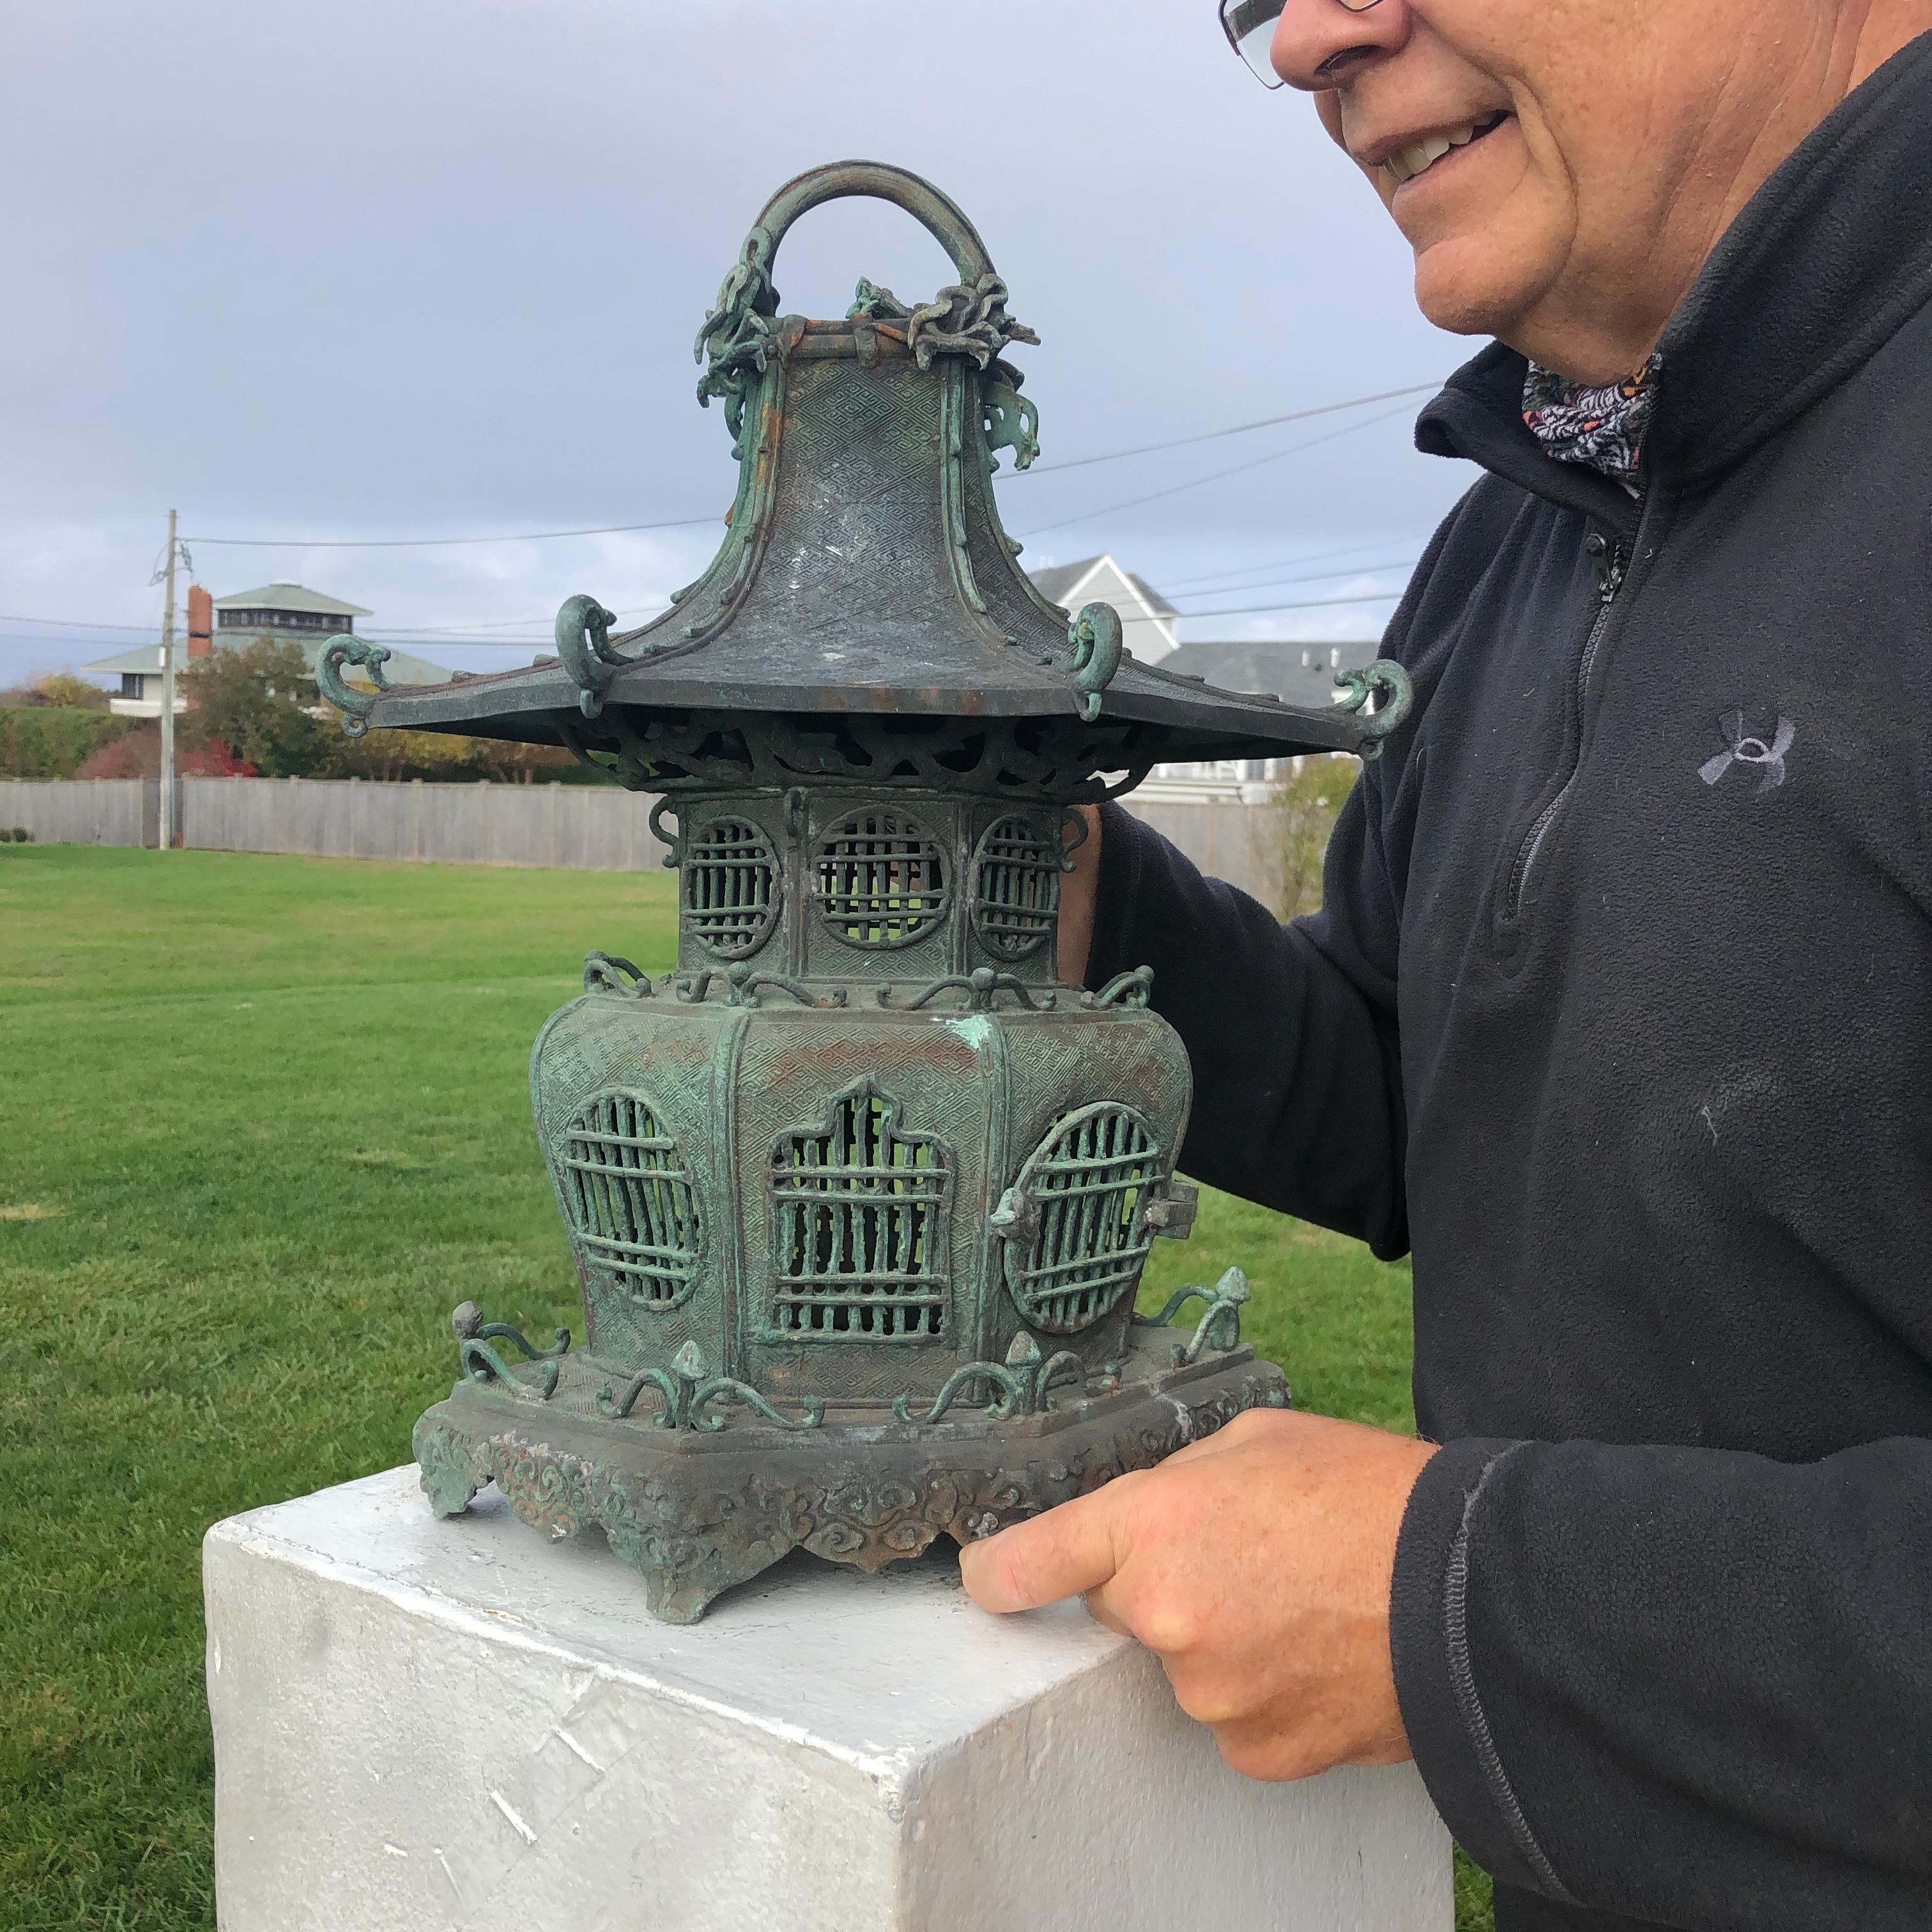 From our recent Japanese acquisitions in original condition

First we have seen

Japan, a substantial and attractive and sturdy 18 inch high lantern with a finely rendered dragon motif at its top. 

Found from a Japanese tea garden. 

Fine